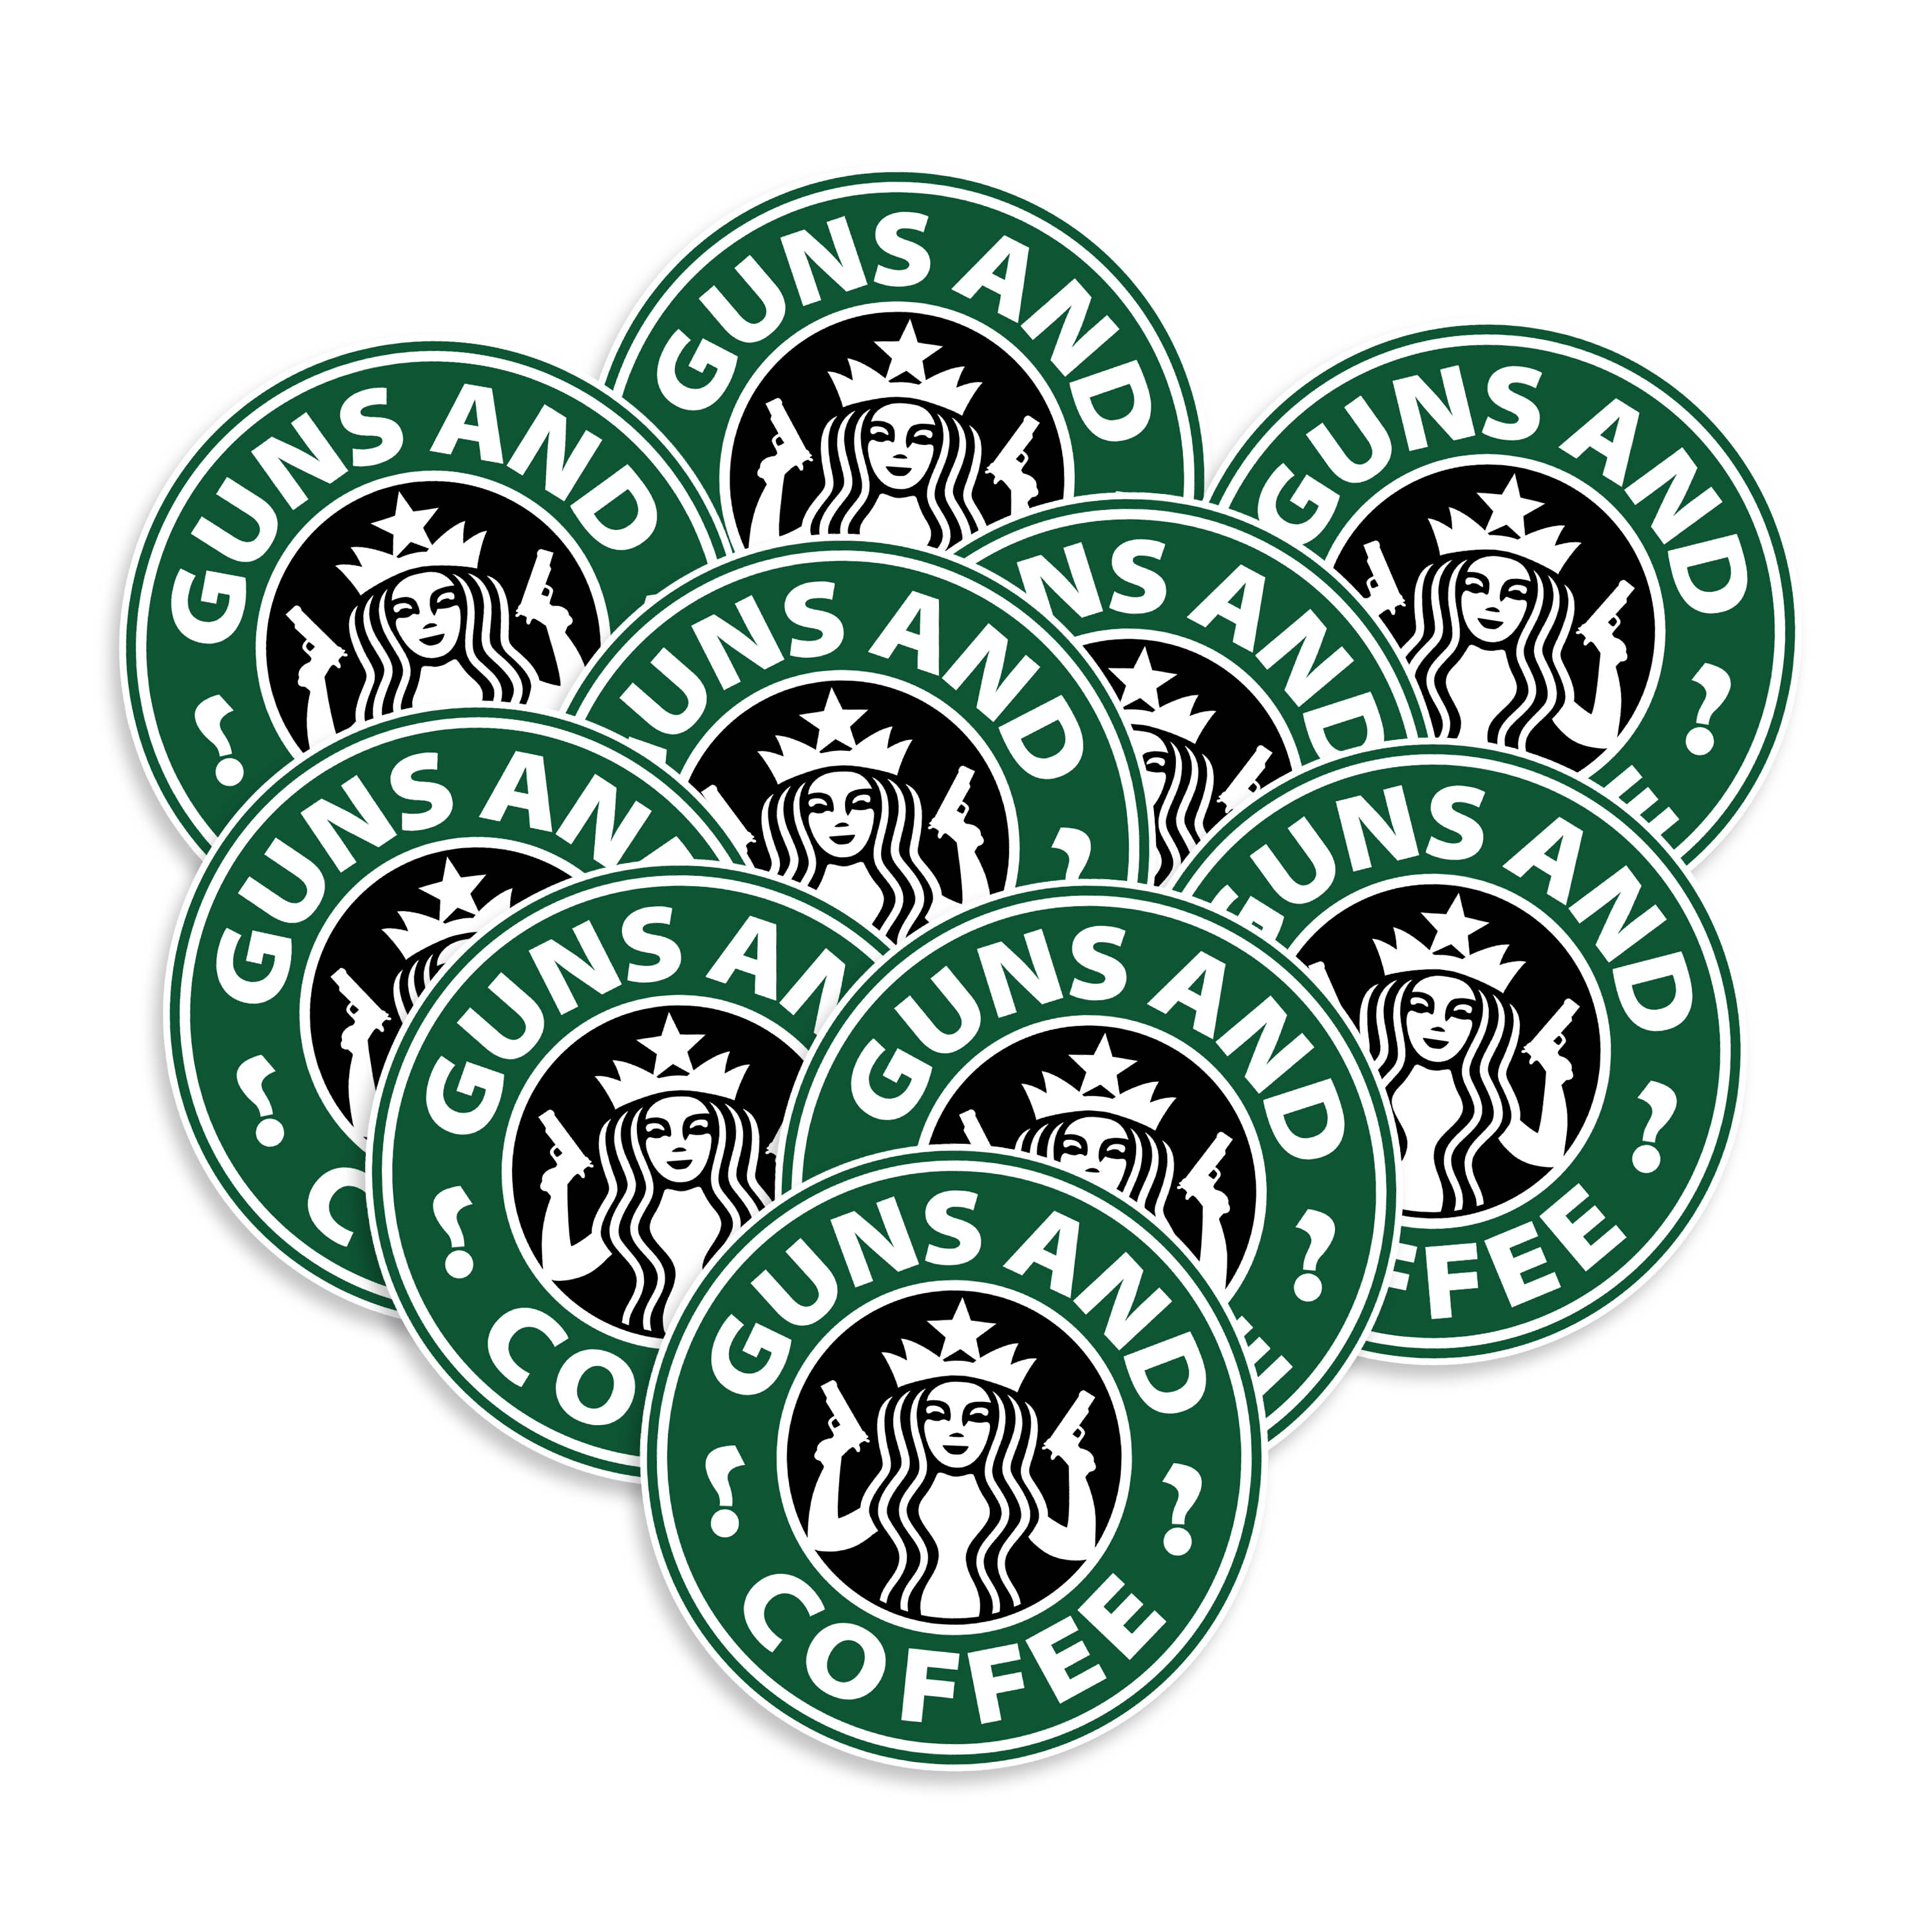 Download Guns And Coffee Vinyl Sticker - NEO Tactical Gear